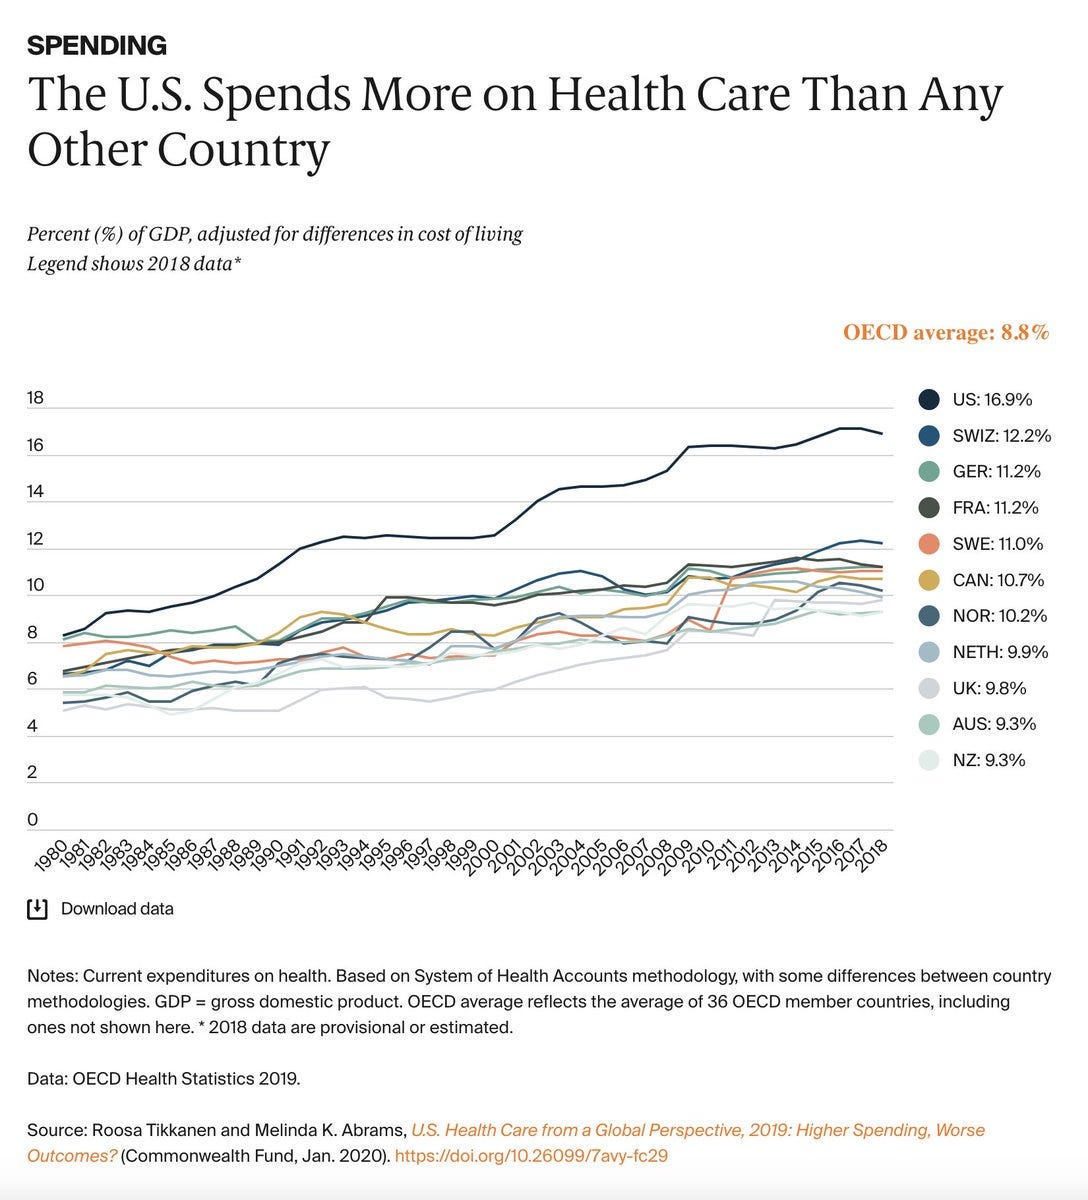 A line graph showing Countries' health spending per capita, adjusted for differences in cost of living. The U.S. spends the most, coming in at 16.9% of the gross domestic product. The next highest is Switzerland at 12.2%, followed by Germany, France, Sweden, Canada, Norway, the Netherlands, the United Kingdom, Australia, and New Zealand. Data from OECD Health Statistics 2019.